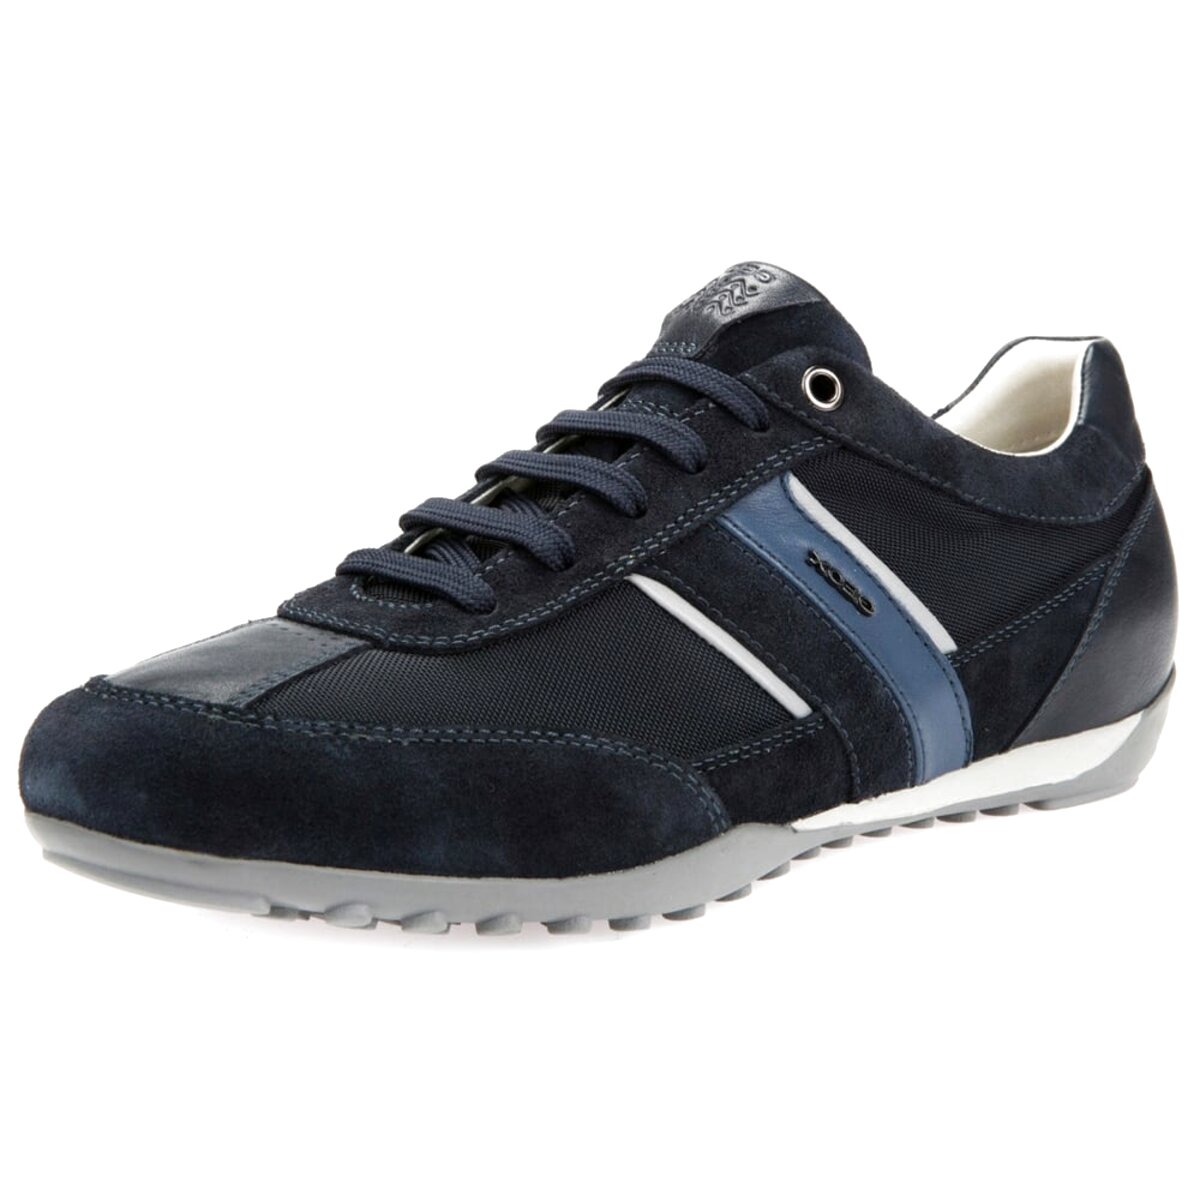 Mens Geox Trainers for sale in UK | 58 used Mens Geox Trainers